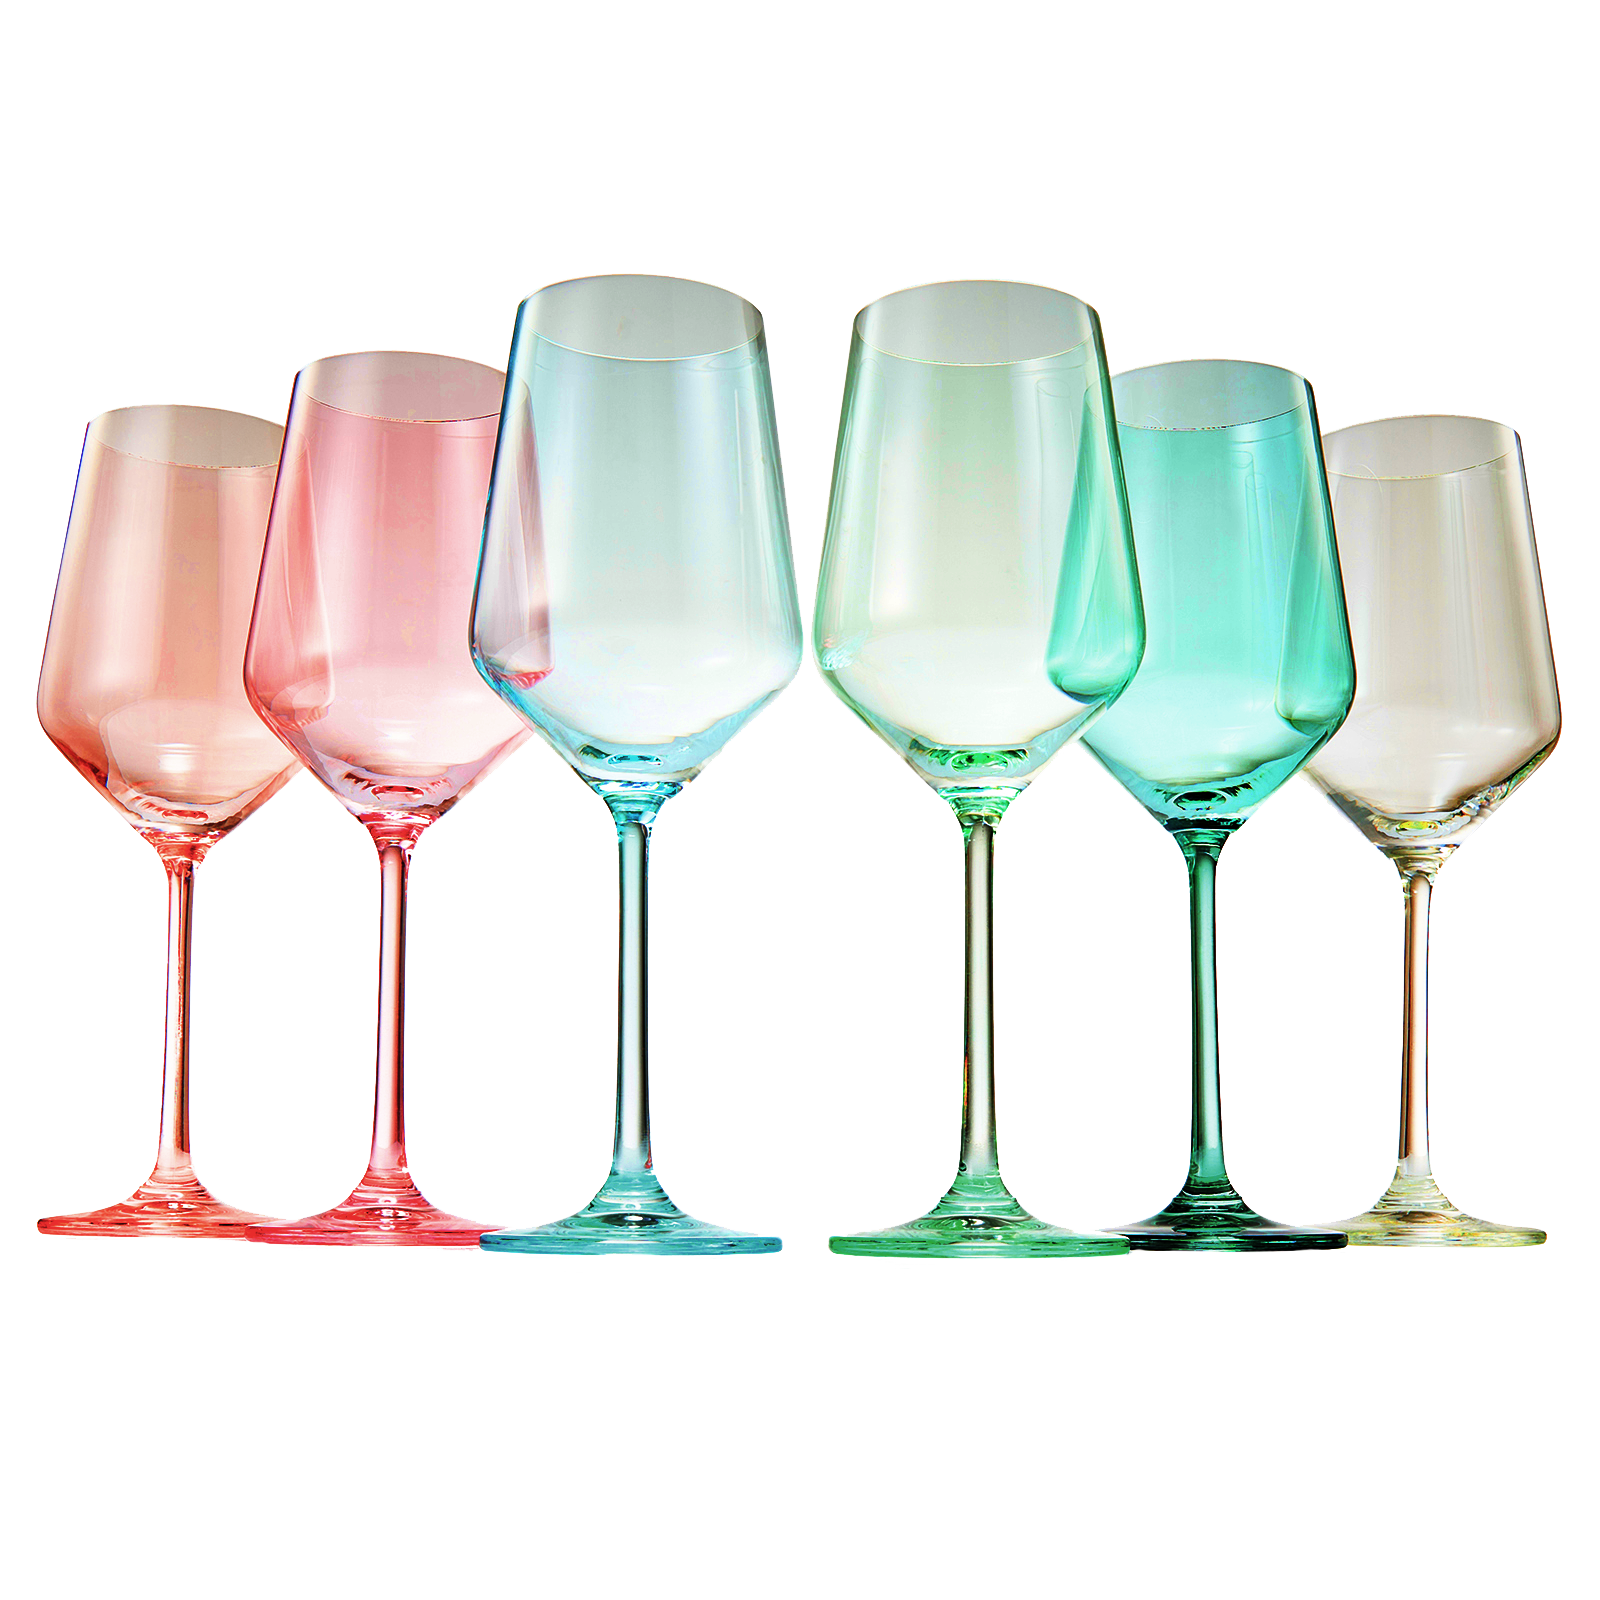 Colored Crystal Wine Glass Set of 6, Gift For Mothers Day, Her, Wife, Mom Friend - Large 12 oz Glasses, Unique Italian Style Tall Drinkware - Red & White, Dinner, Beautiful Glassware - (Summer)-0